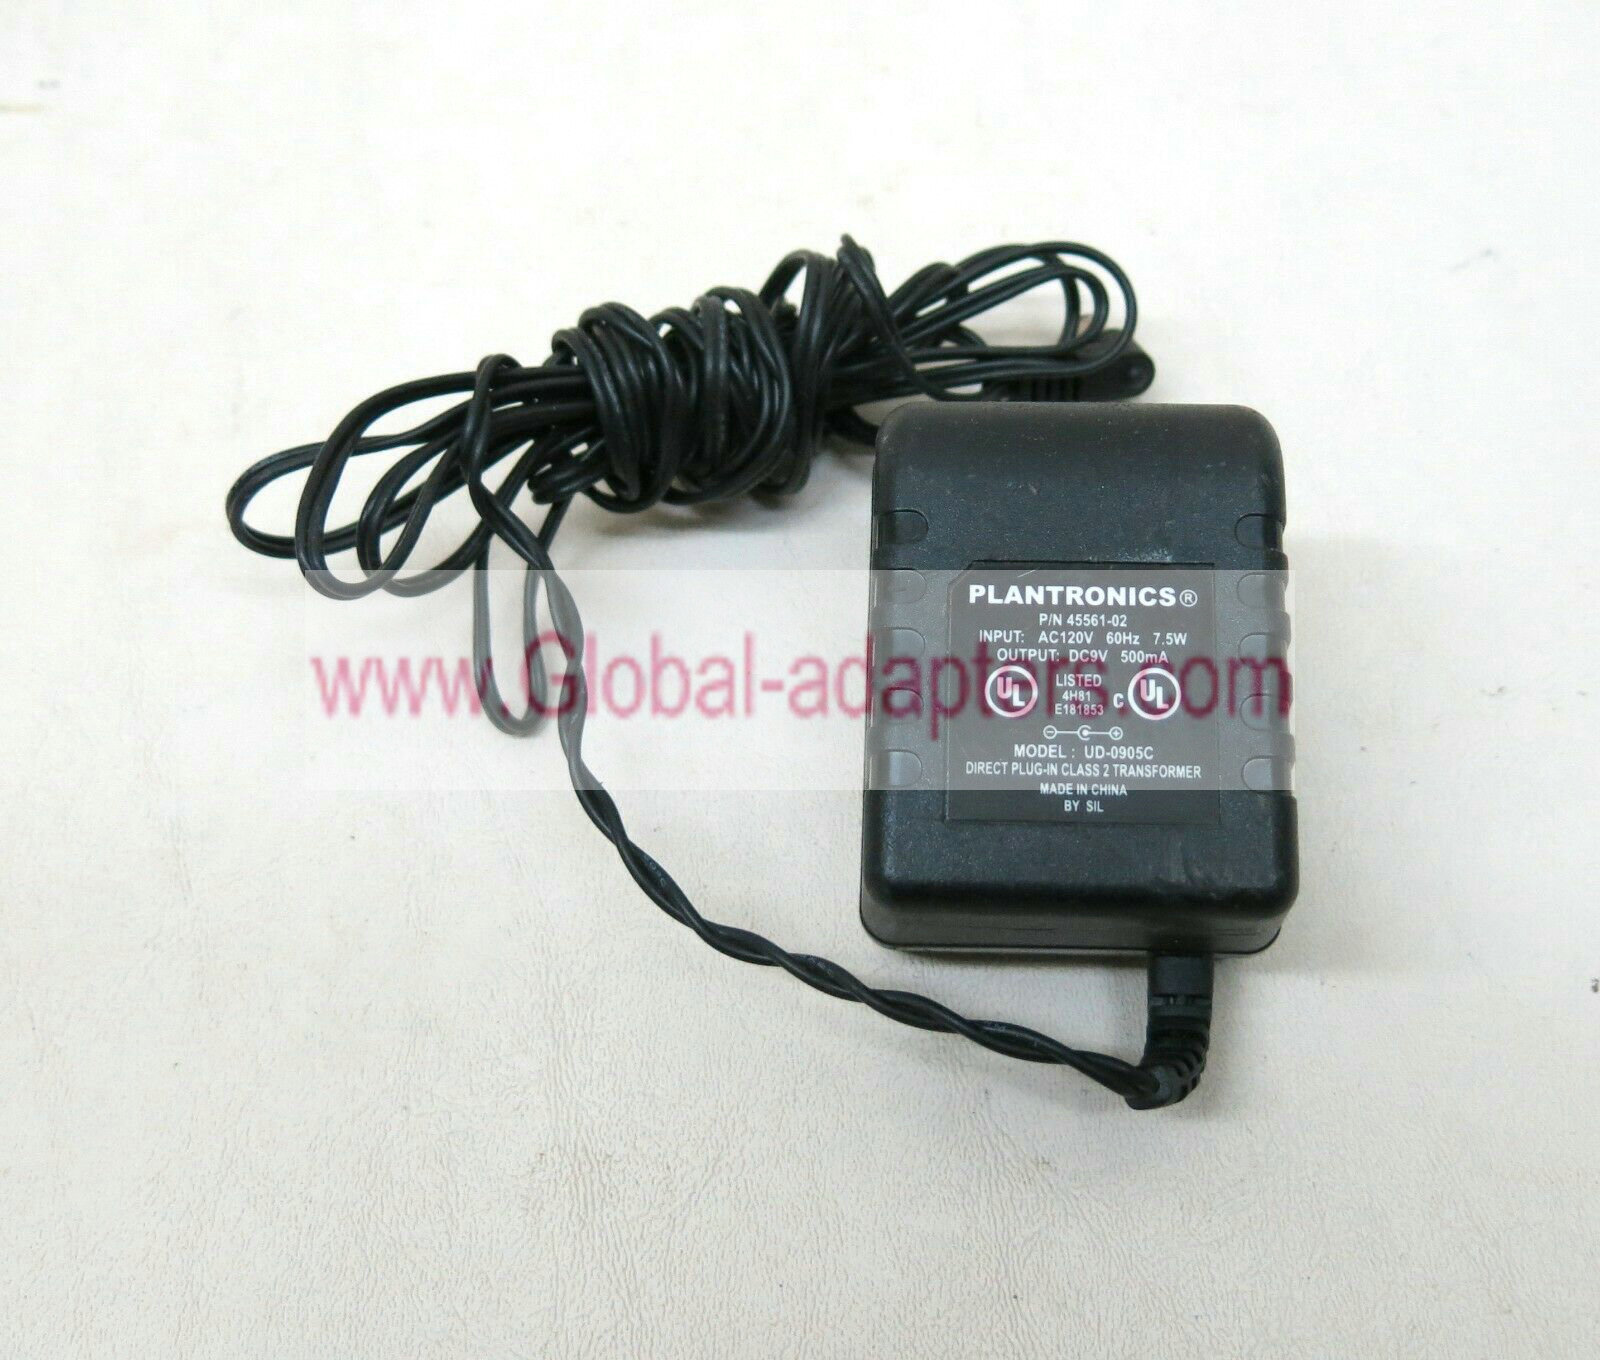 New SIL UD-0905C 45561-02 DC 9V 500mA AC Adapter Power Supply for Plantronics Headset Base